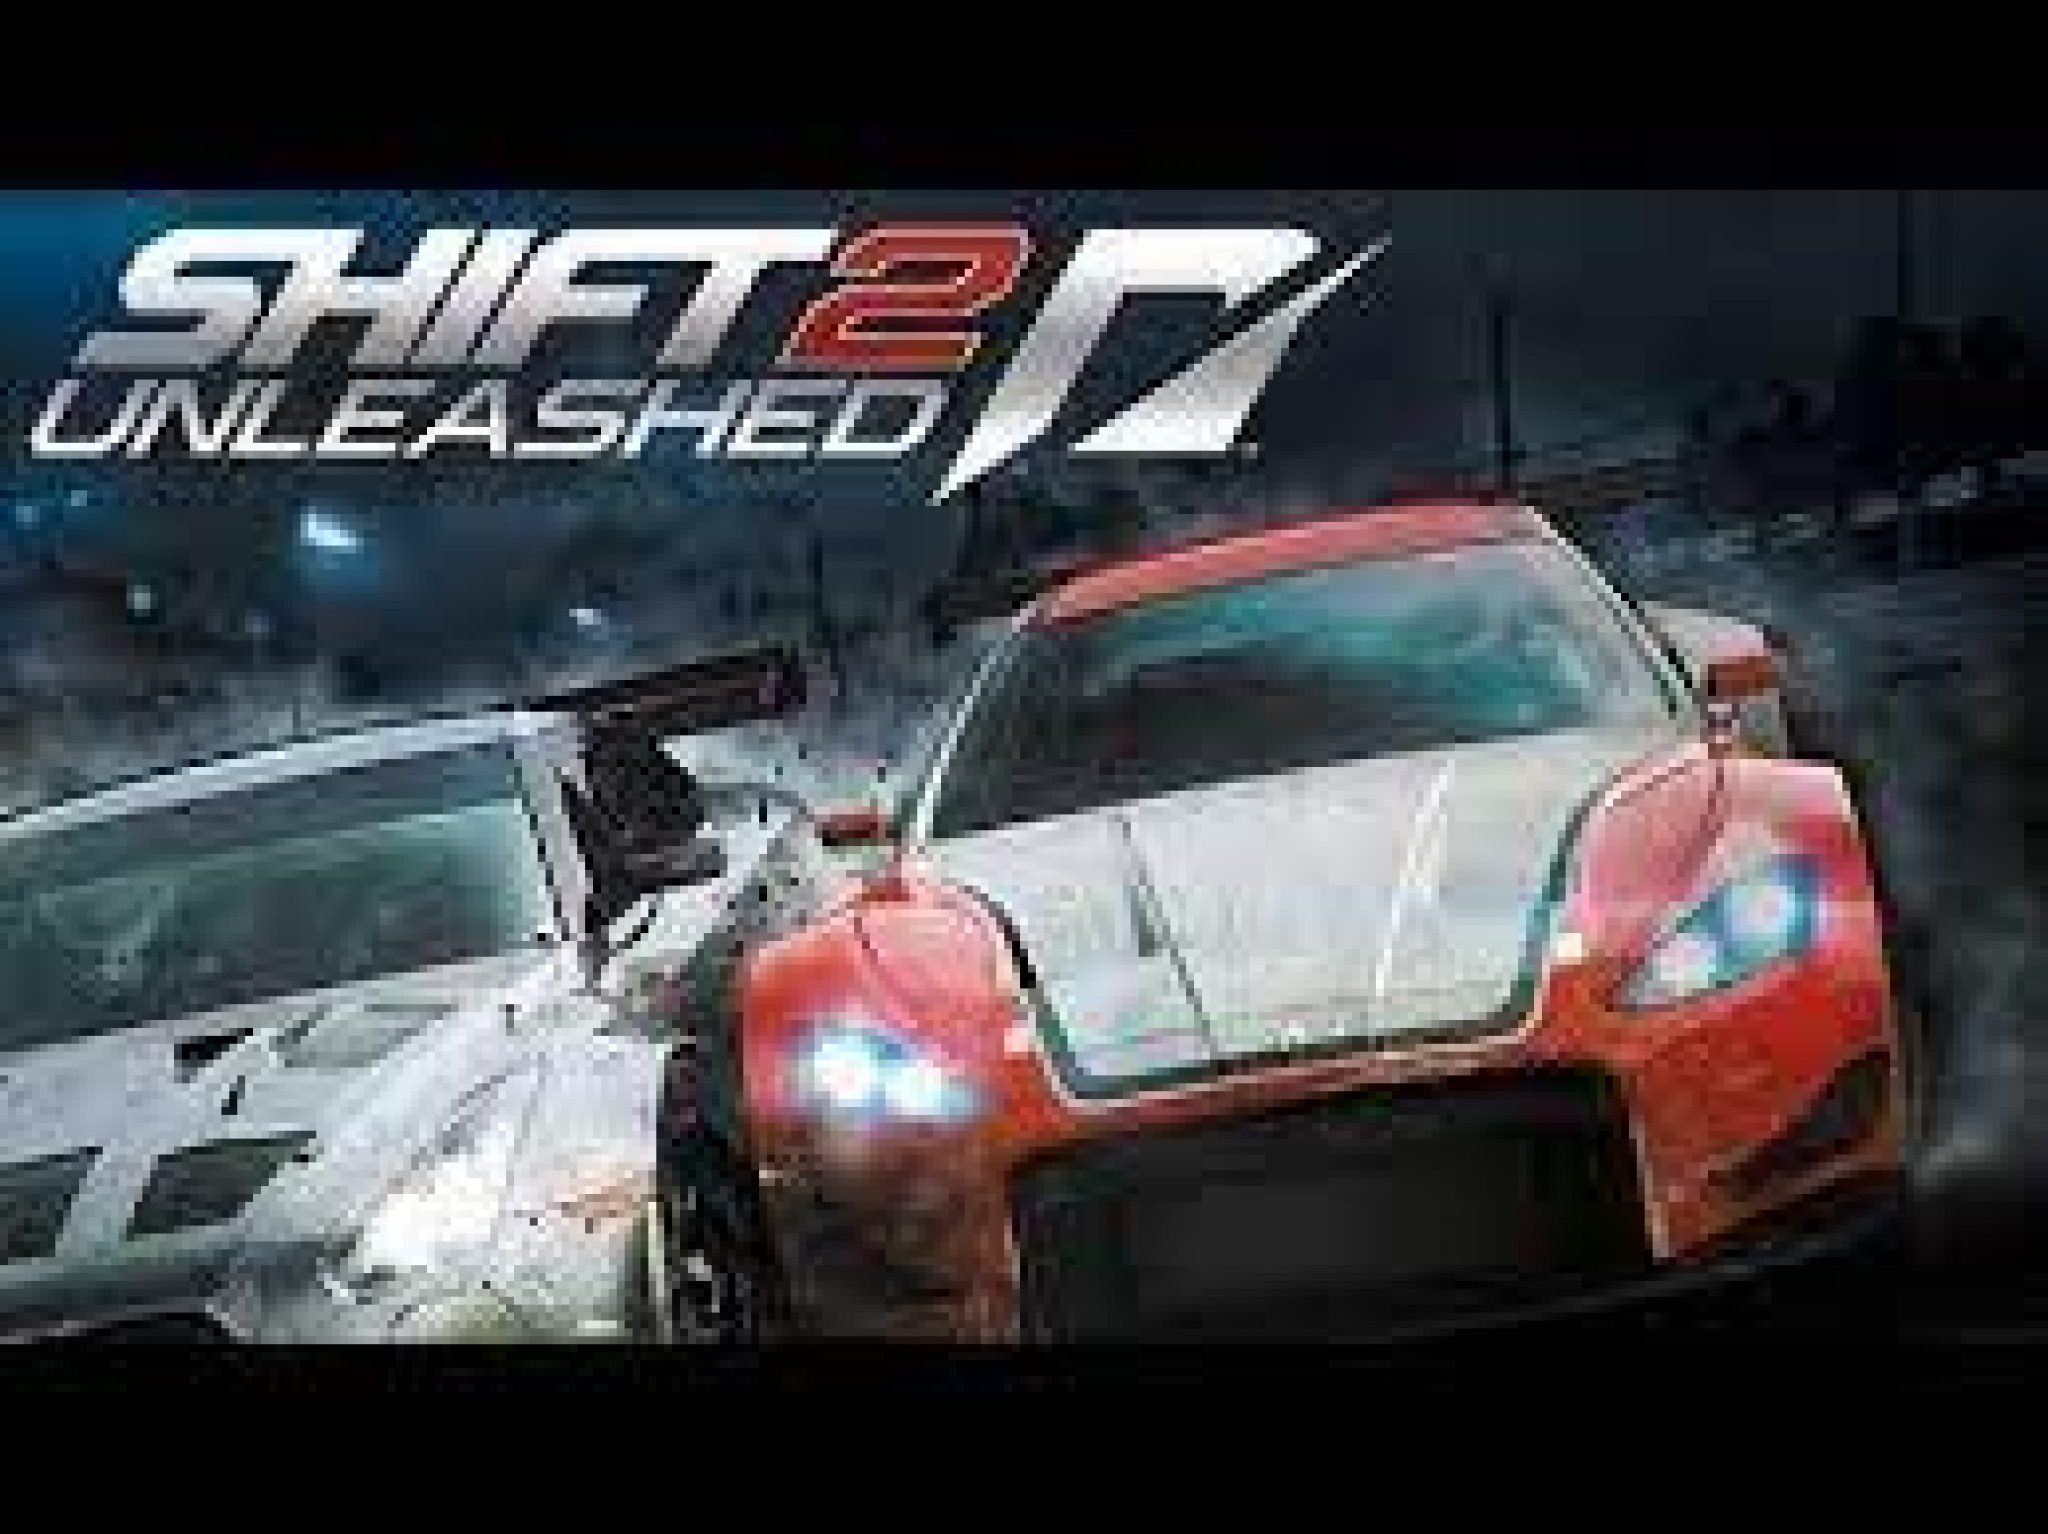 shift-2-unleashed-download-pc-game-free